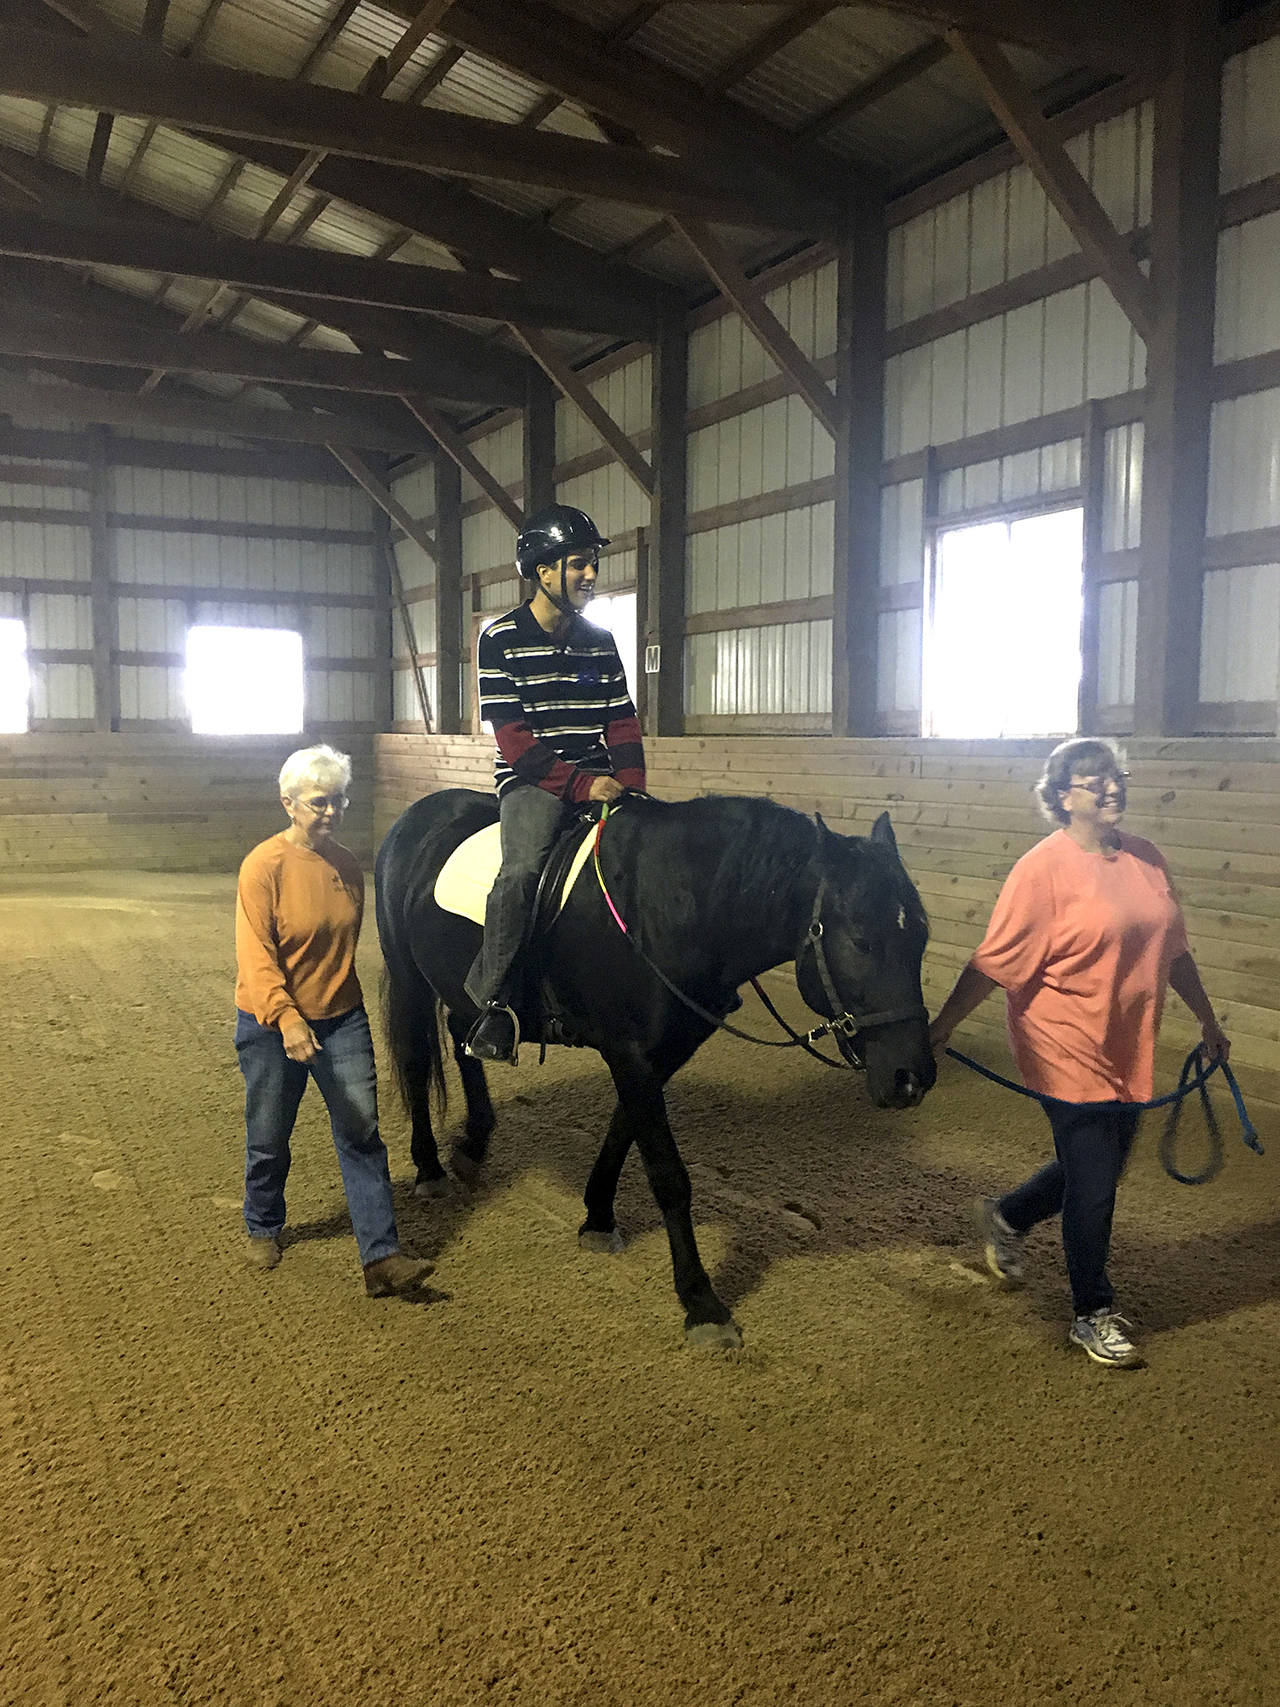 Cathy Janek | Chicago Tribune                                Volunteers Jan Lauwers and Liz Klemenswicz with Giant Steps help rider Waqas Kahn during a program at Rich Harvest Farms near Sugar Grove, Illinois.